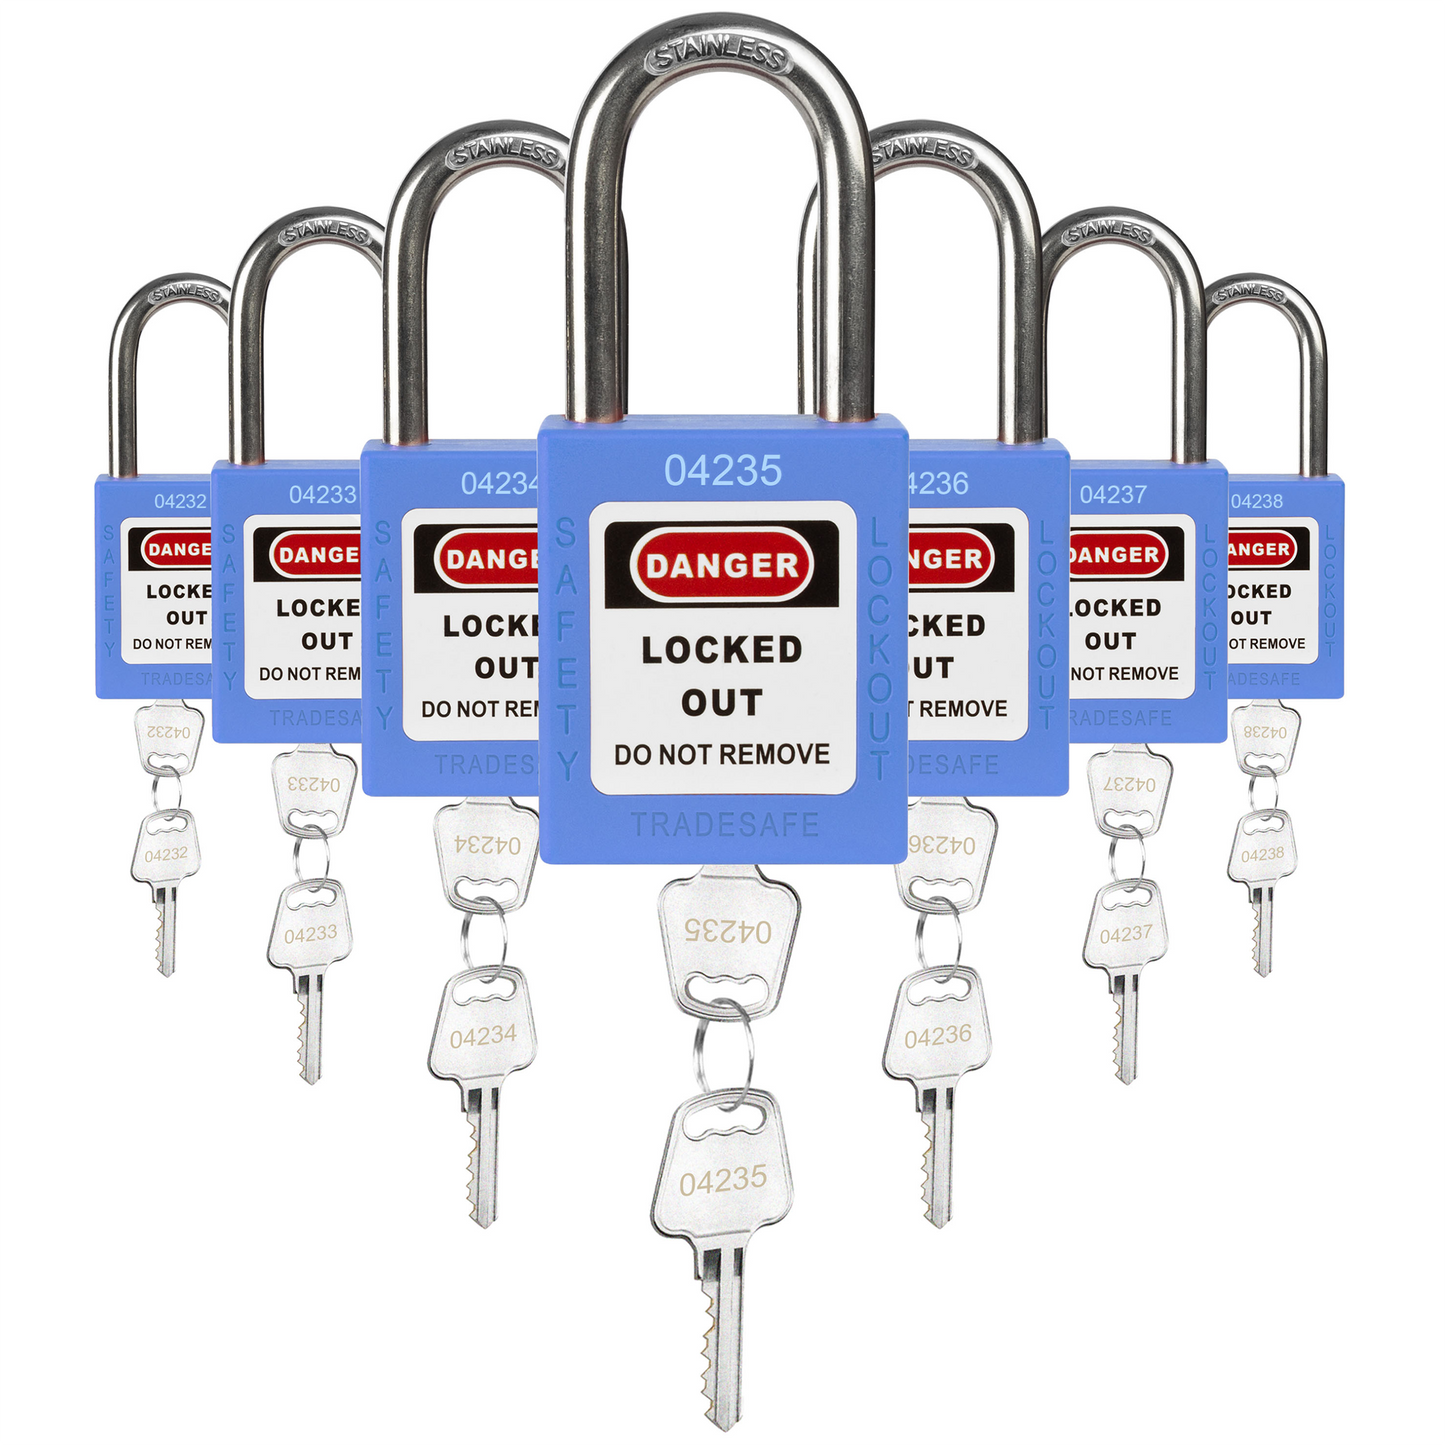 seven blue loto padlocks, each with two keys and a unique five-digit code engraved in both keys and padlock body